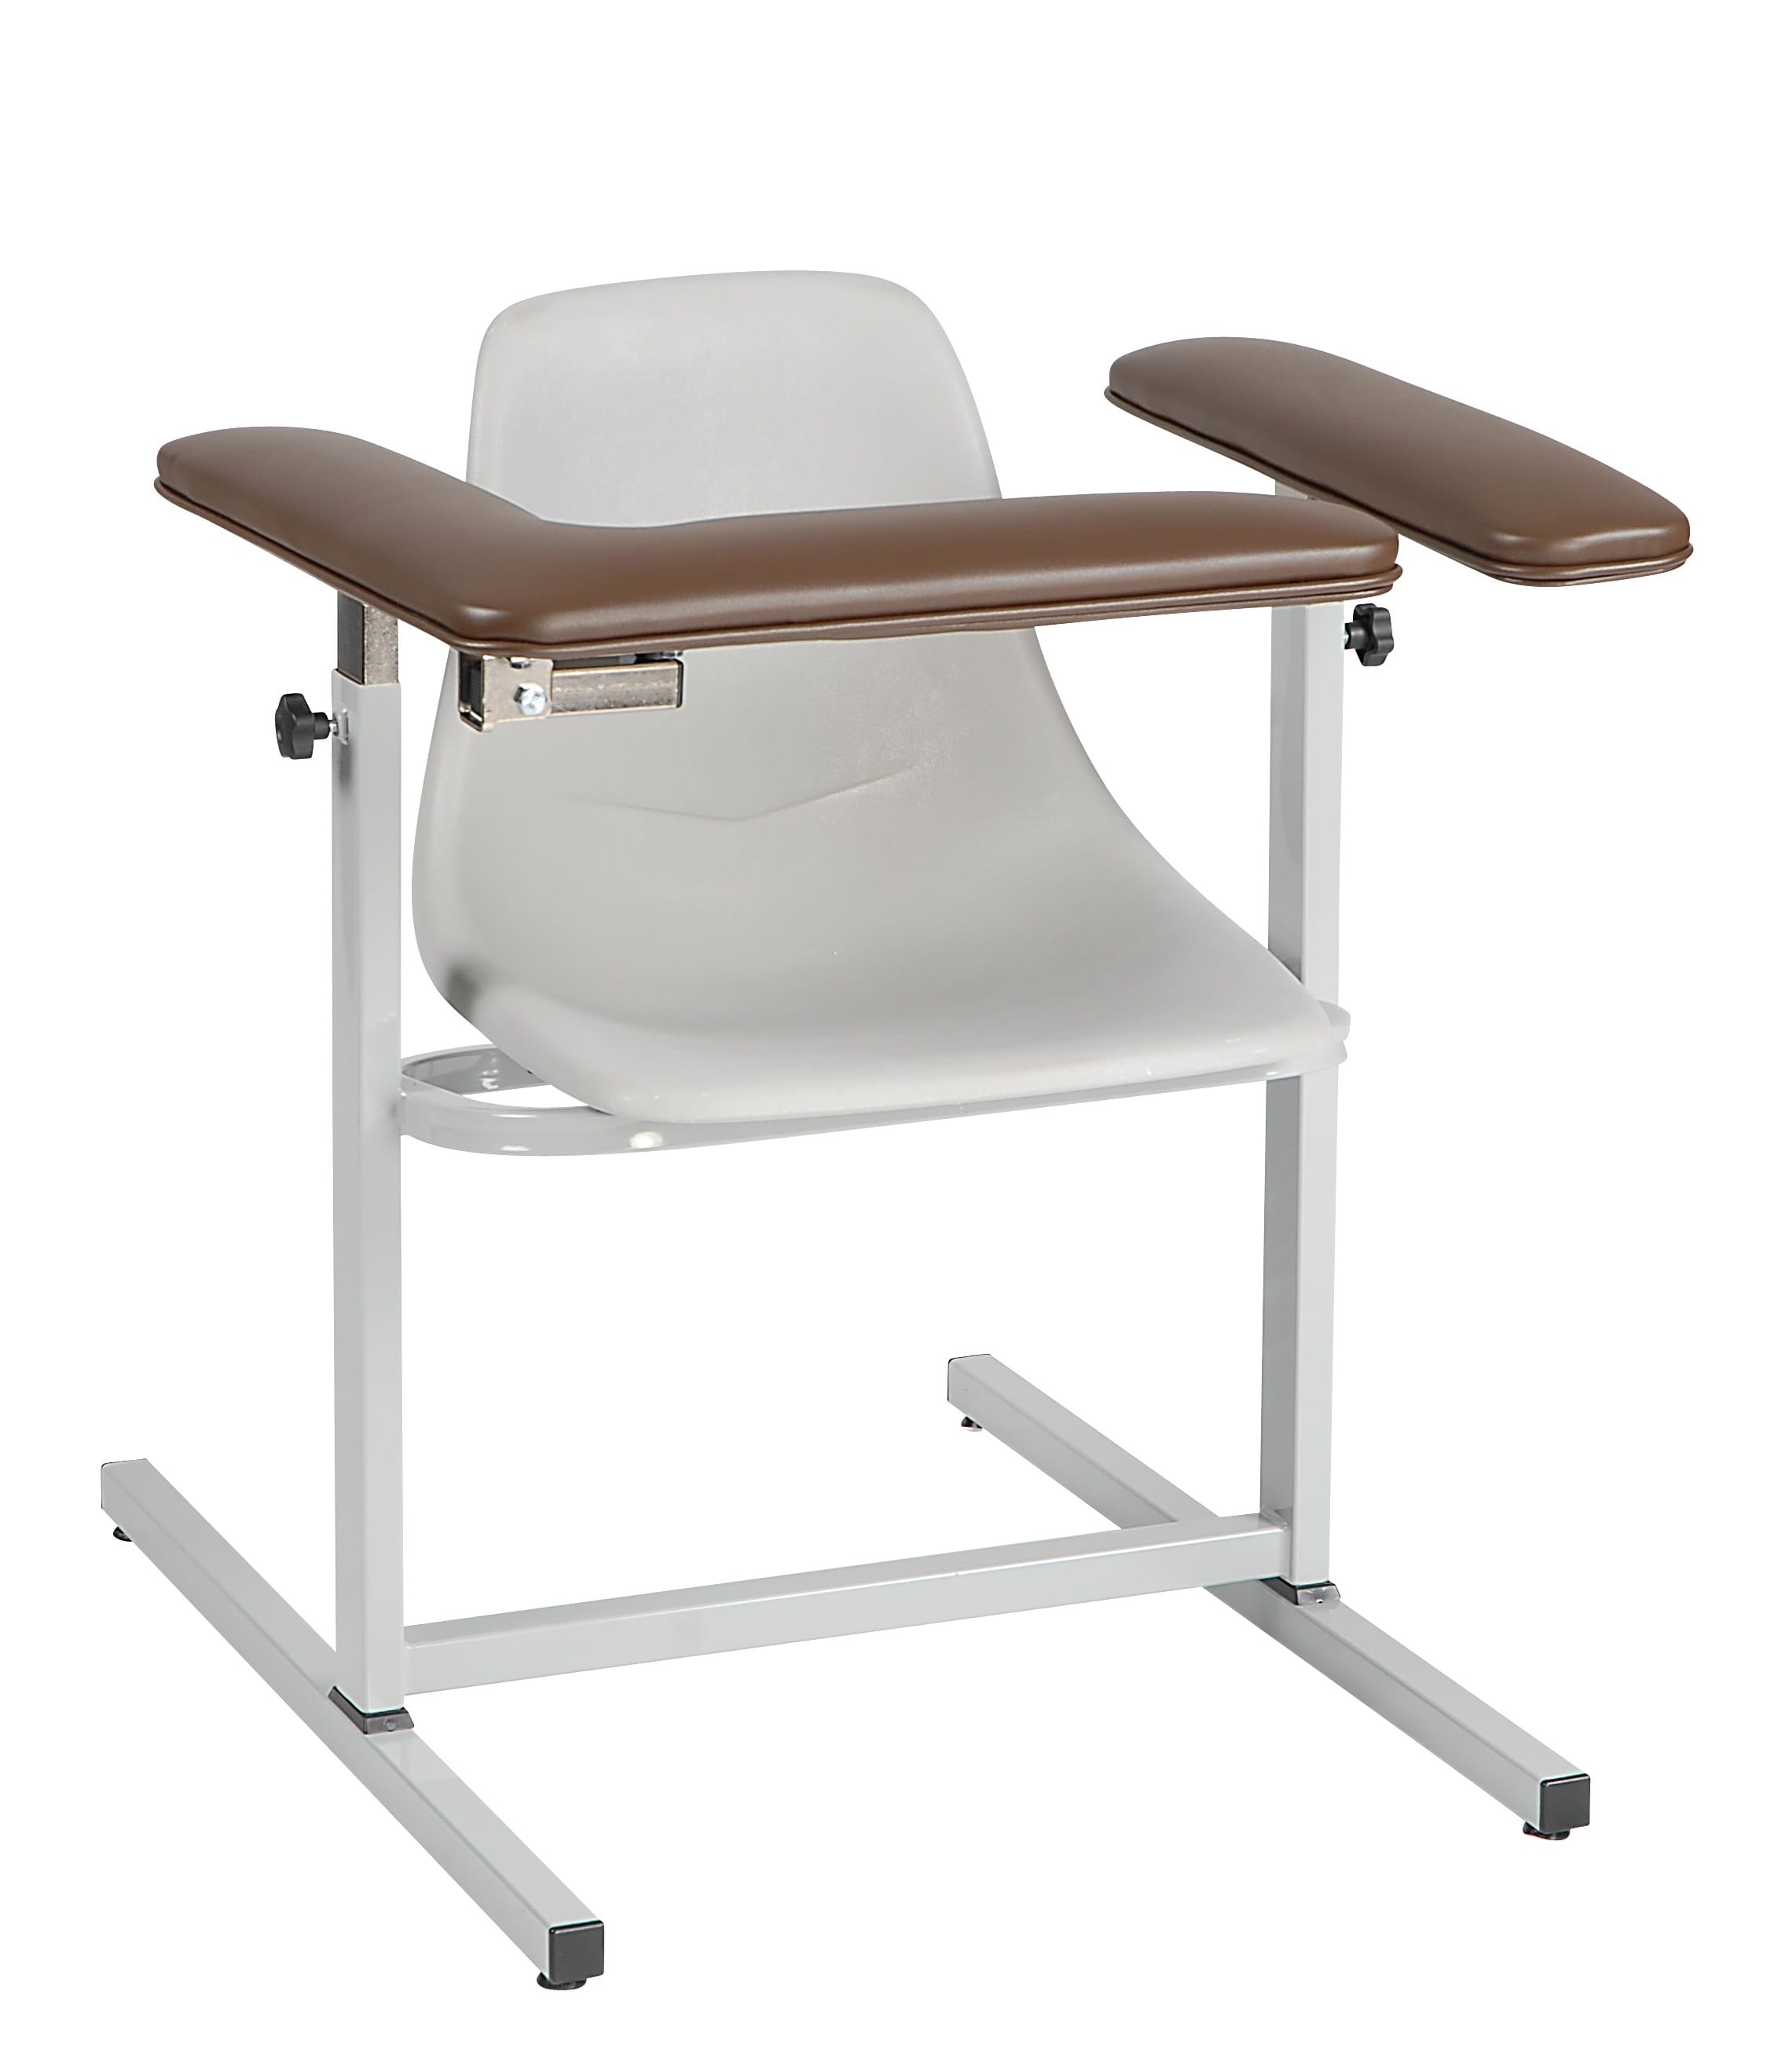 Narrow Standard Height Space Saving Blood Draw Chair with Contoured Seat